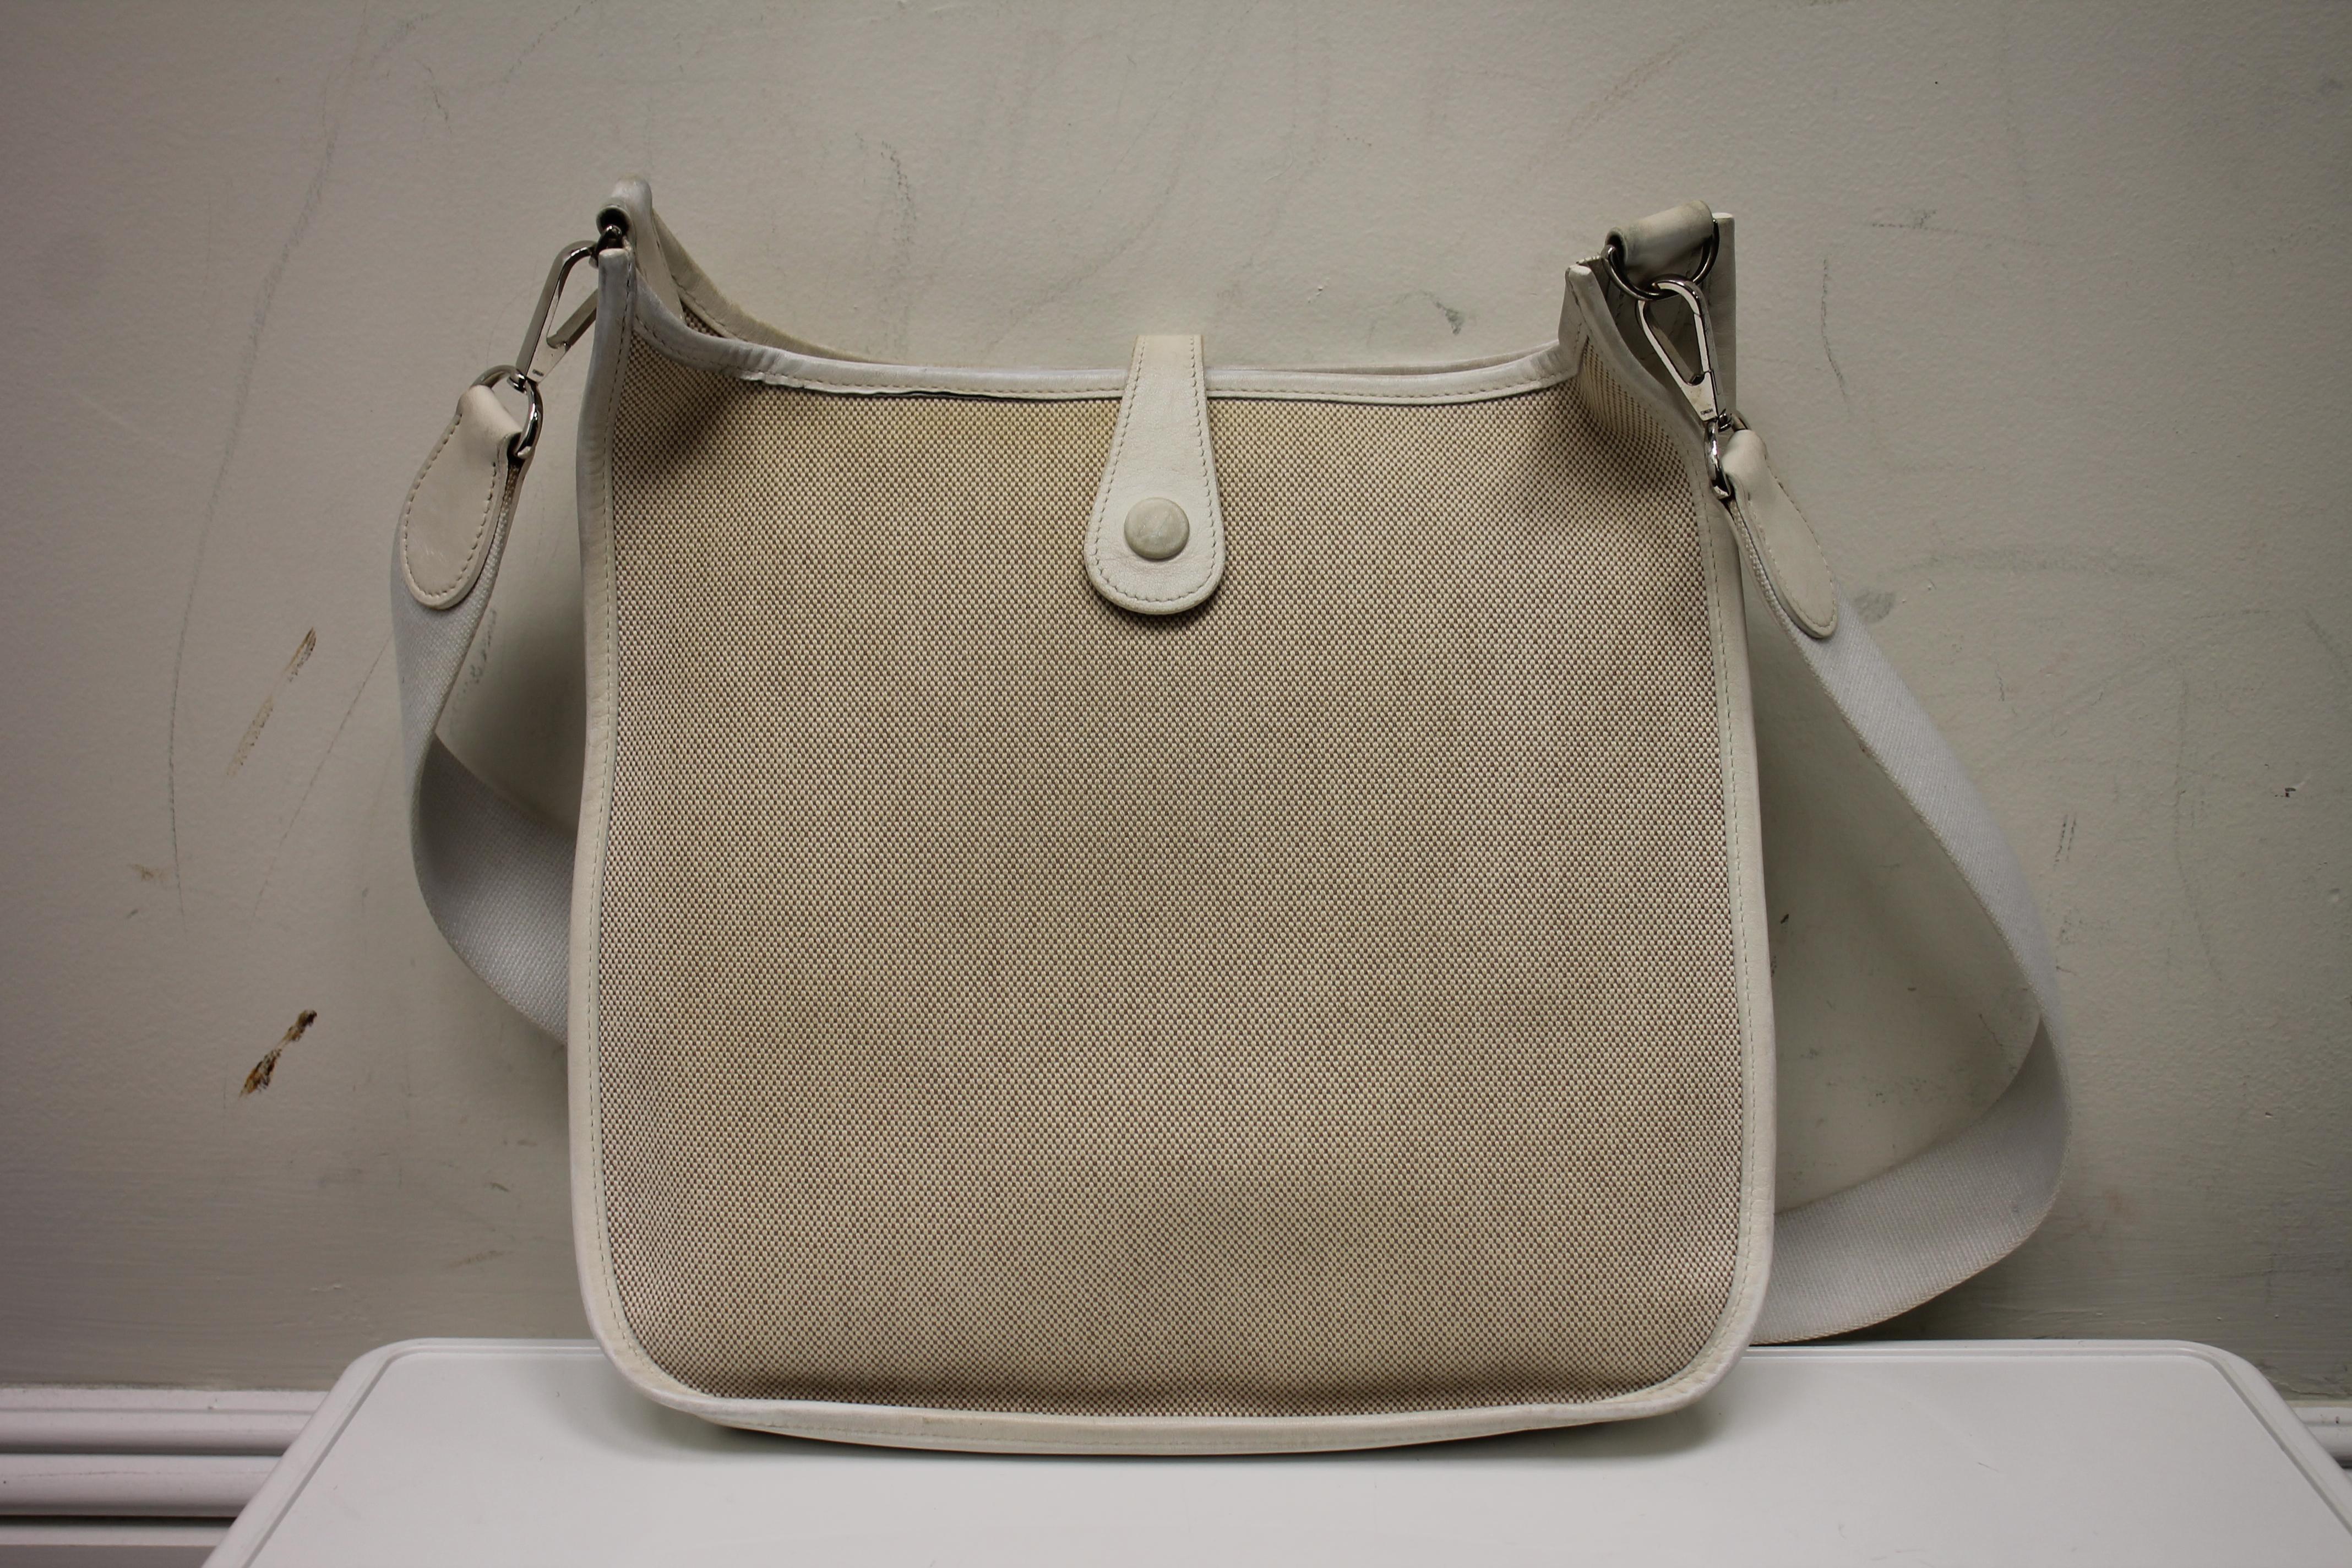 White leather and natural canvas. Palladium hardware. Snap closure at top. Perforated 